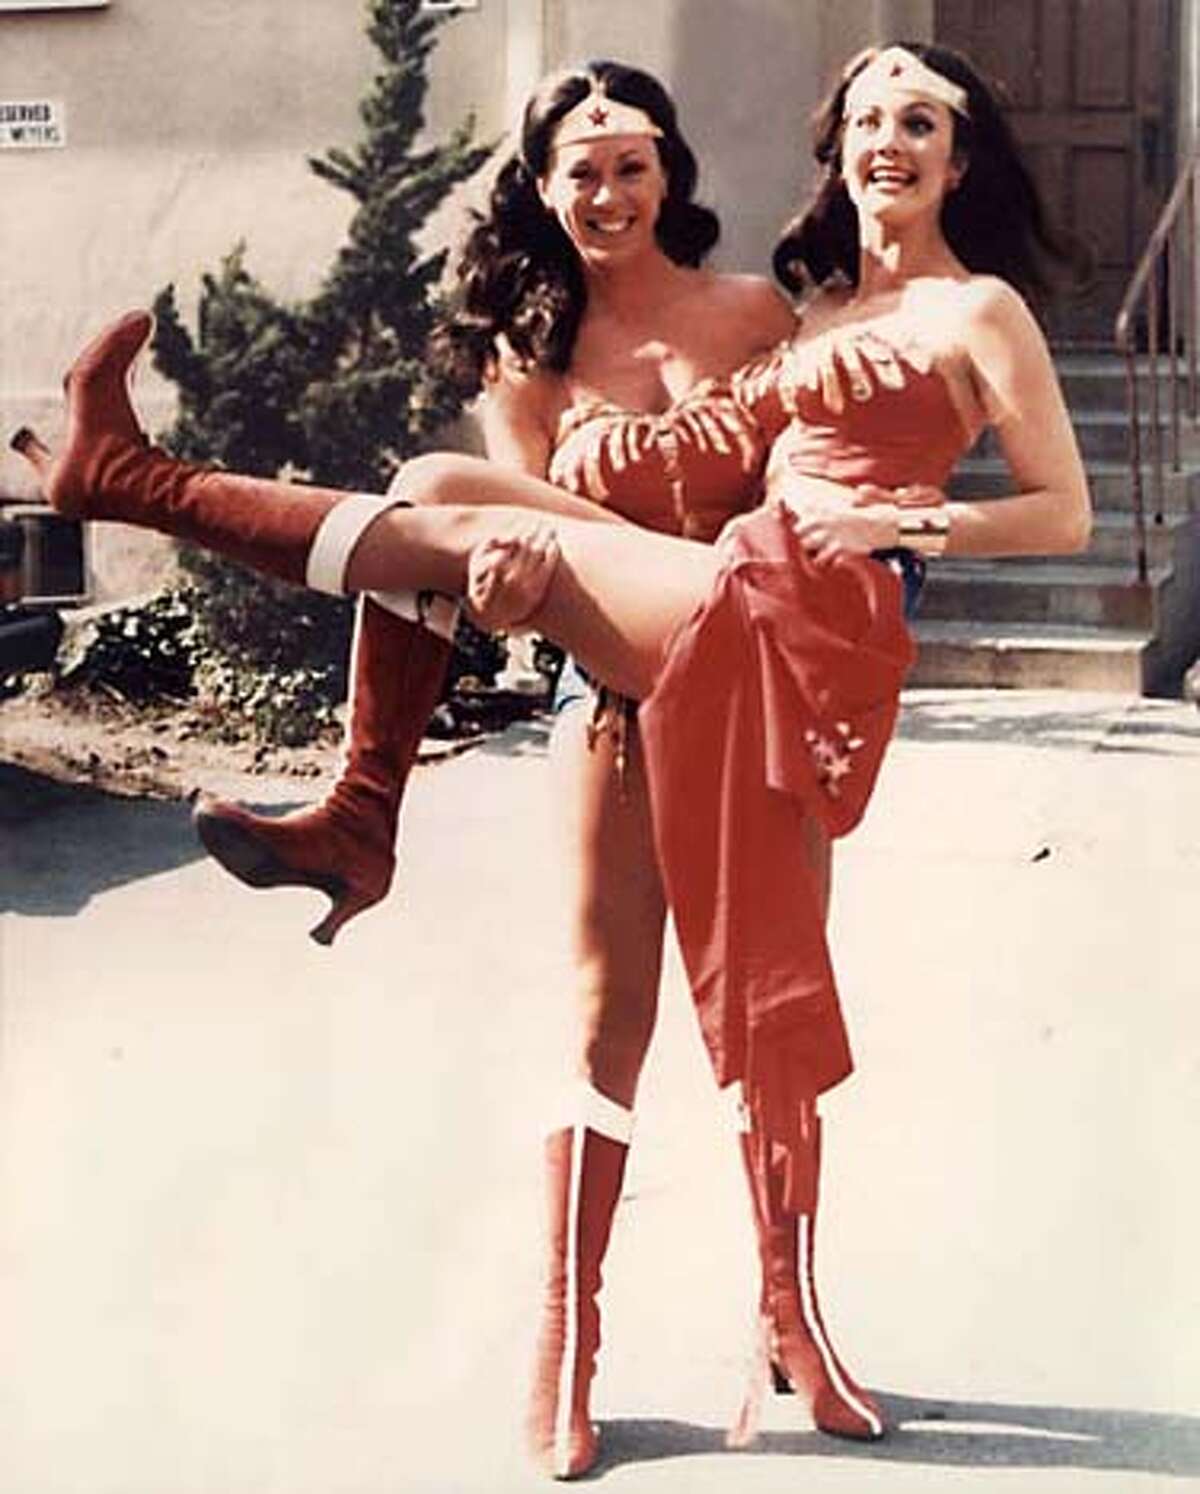 Stuntwoman Jeannie Epper (left) and Lynda Carter (the real Wonder Woman) in a still from�"Double Dare," a documentary by Amanda Micheli of San Francisco that is screening at the Sonoma Valley Film Festival.